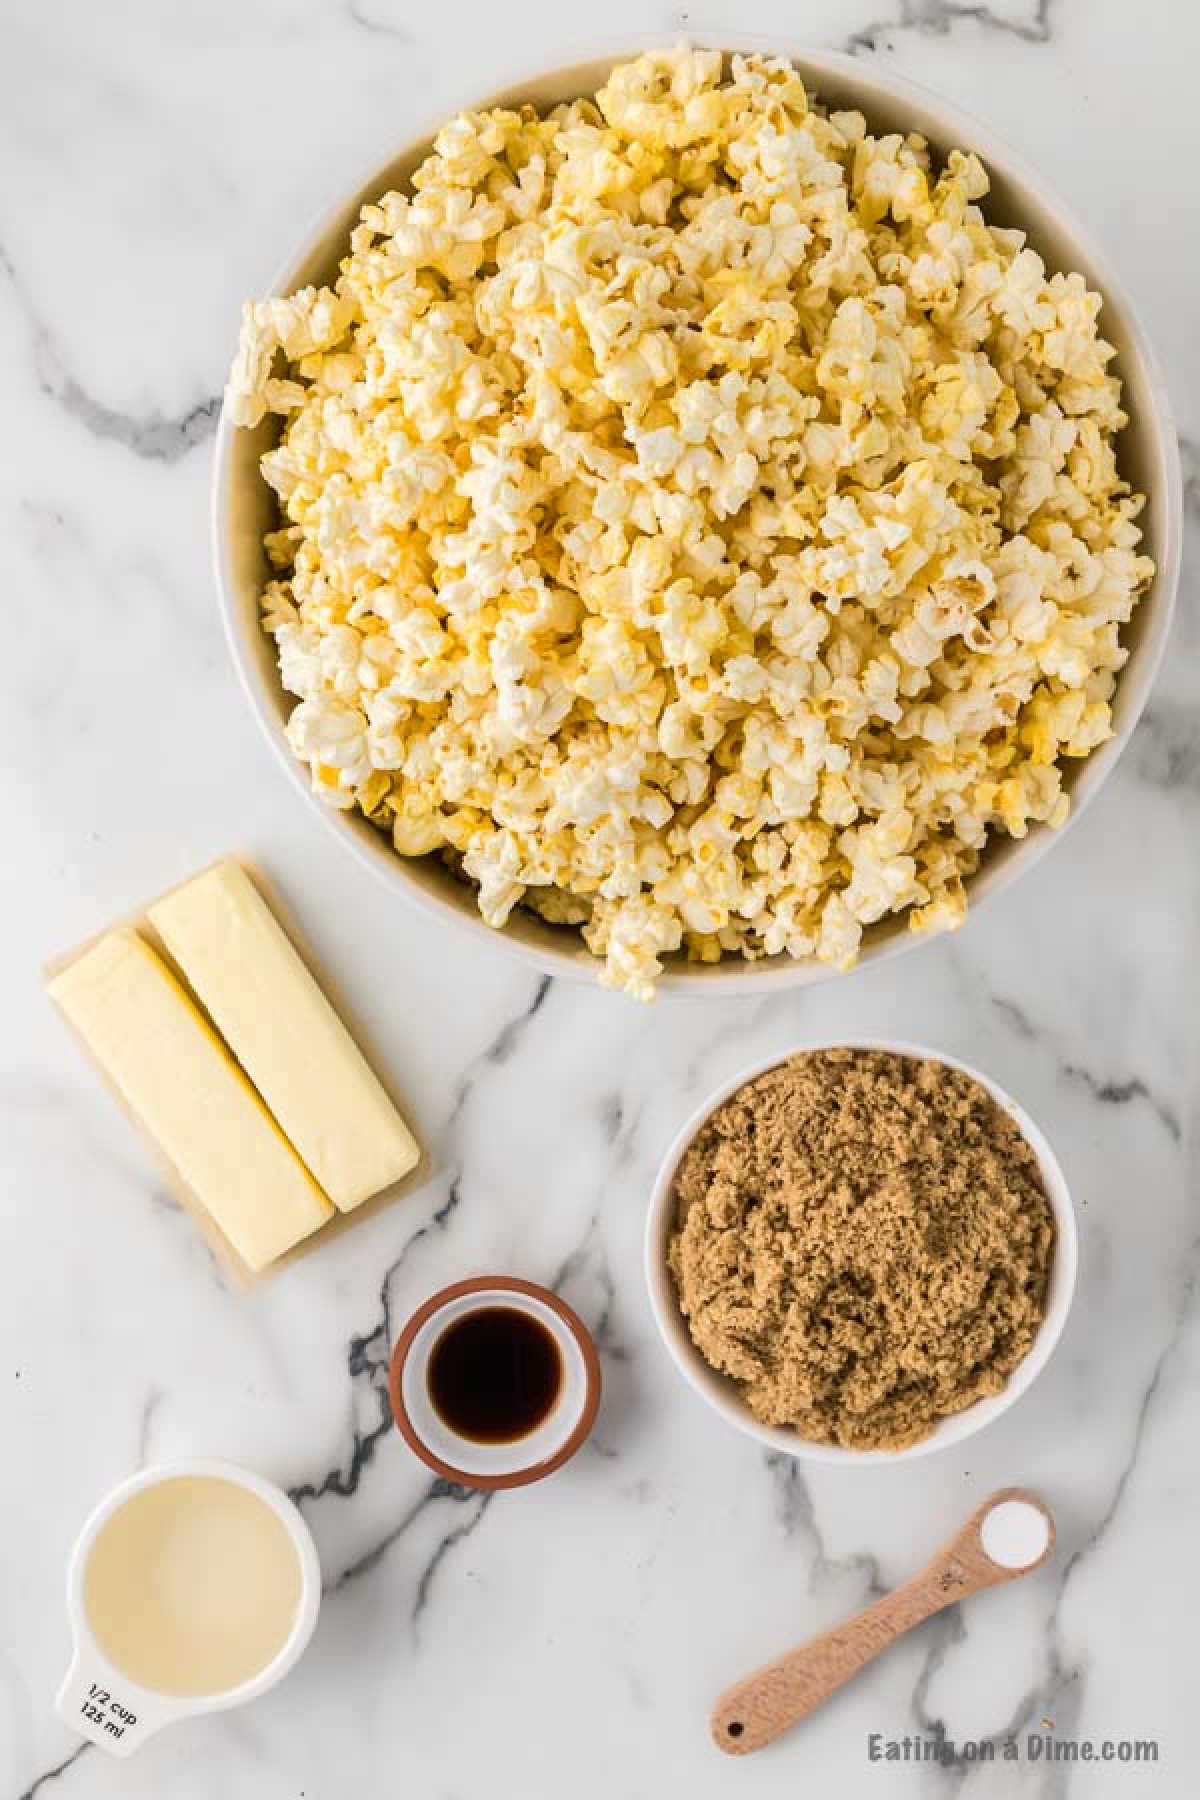 Close up image of ingredients for caramel popcorn - popcorn, butter, brown sugar, corn syrup, salt, baking soda, vanilla extract, butter